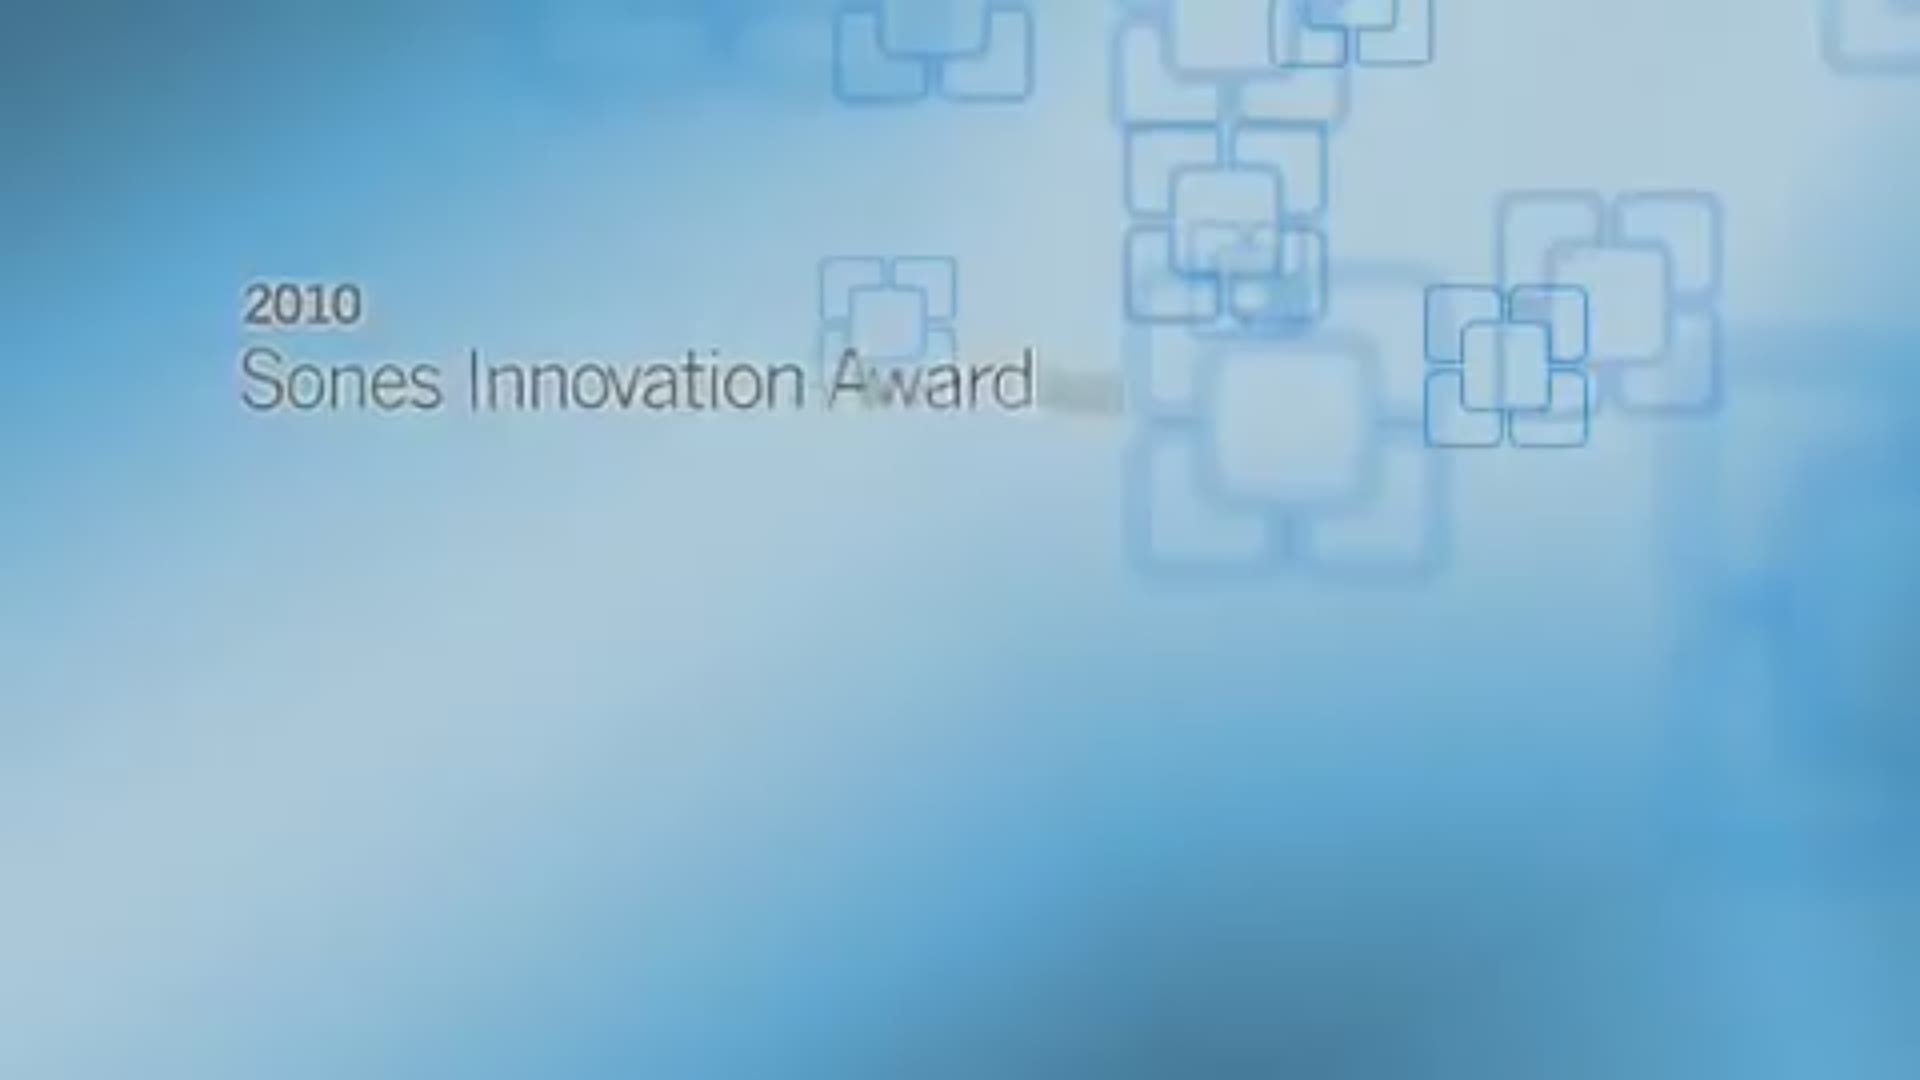 Cleveland Clinic's Dr. Tuohy wins 2010 Innovation Award